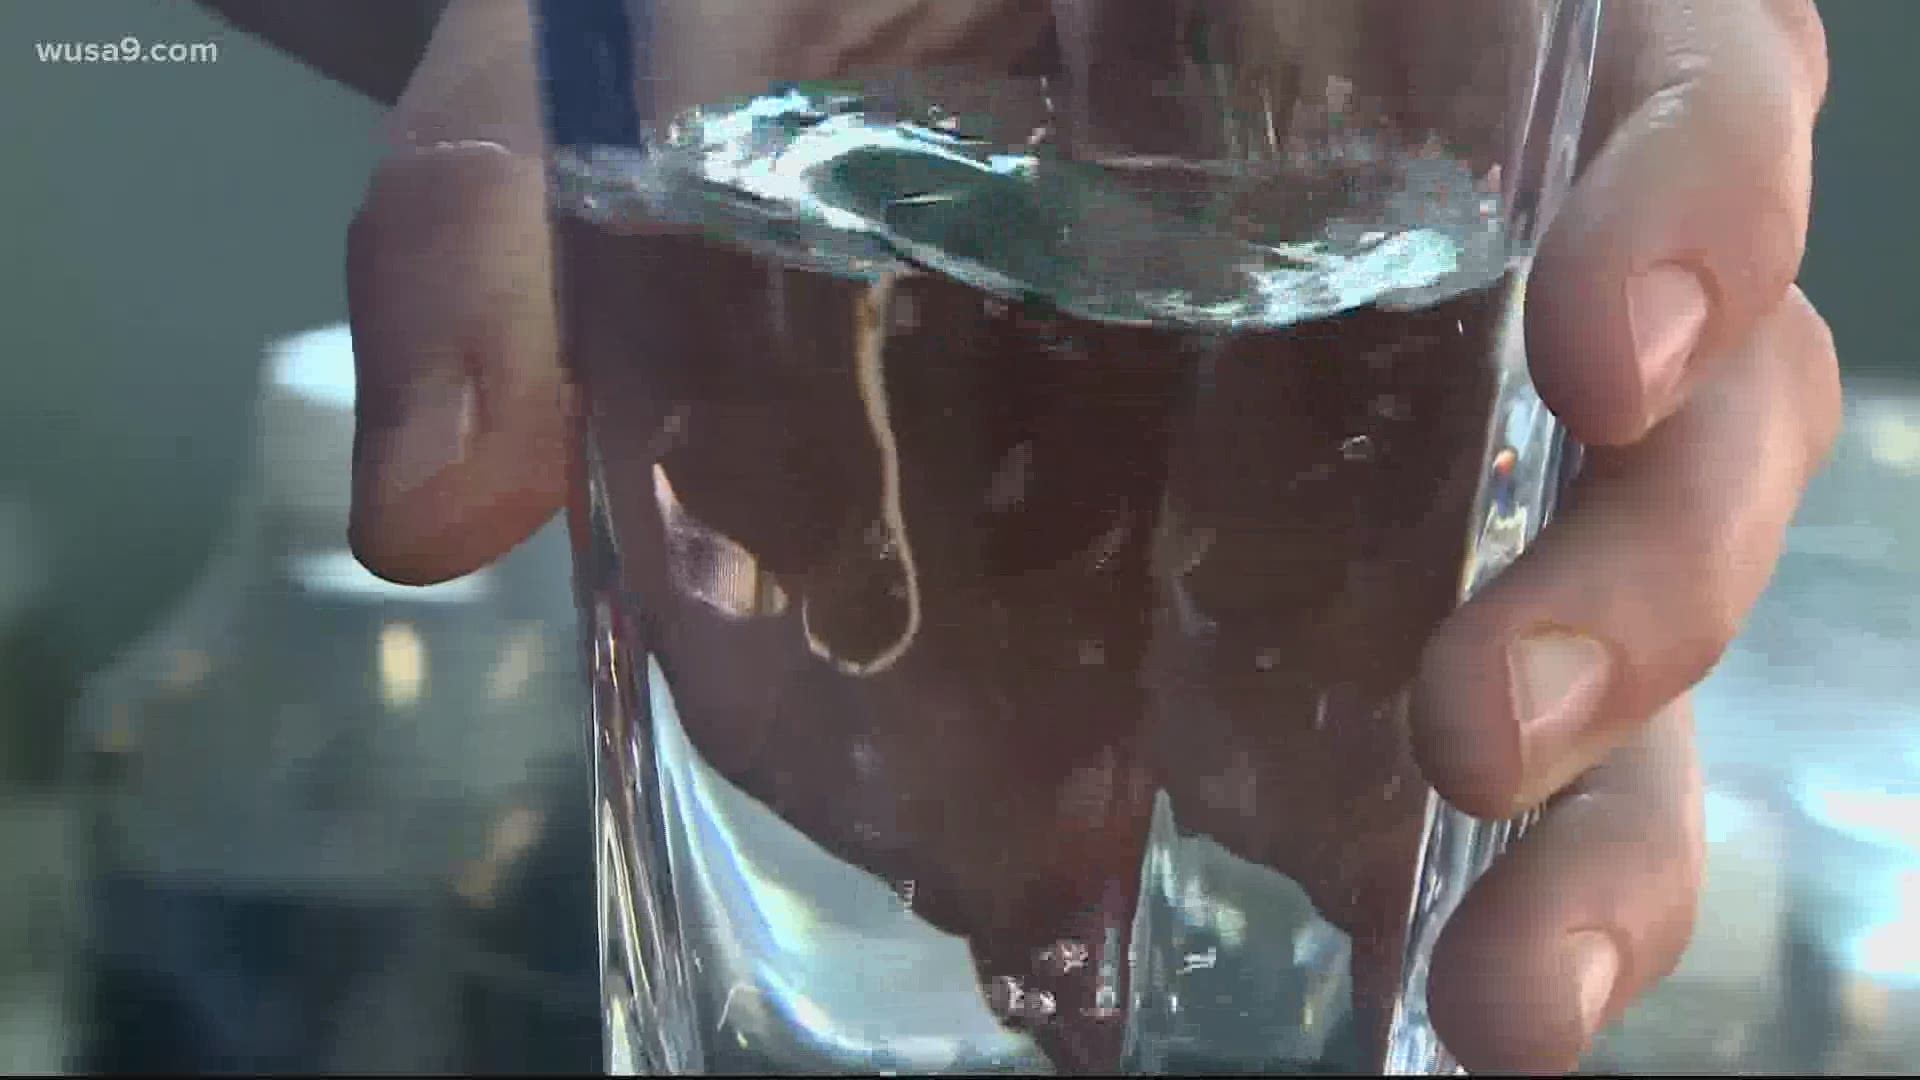 Environmental groups are calling on leaders to clean the water supply.